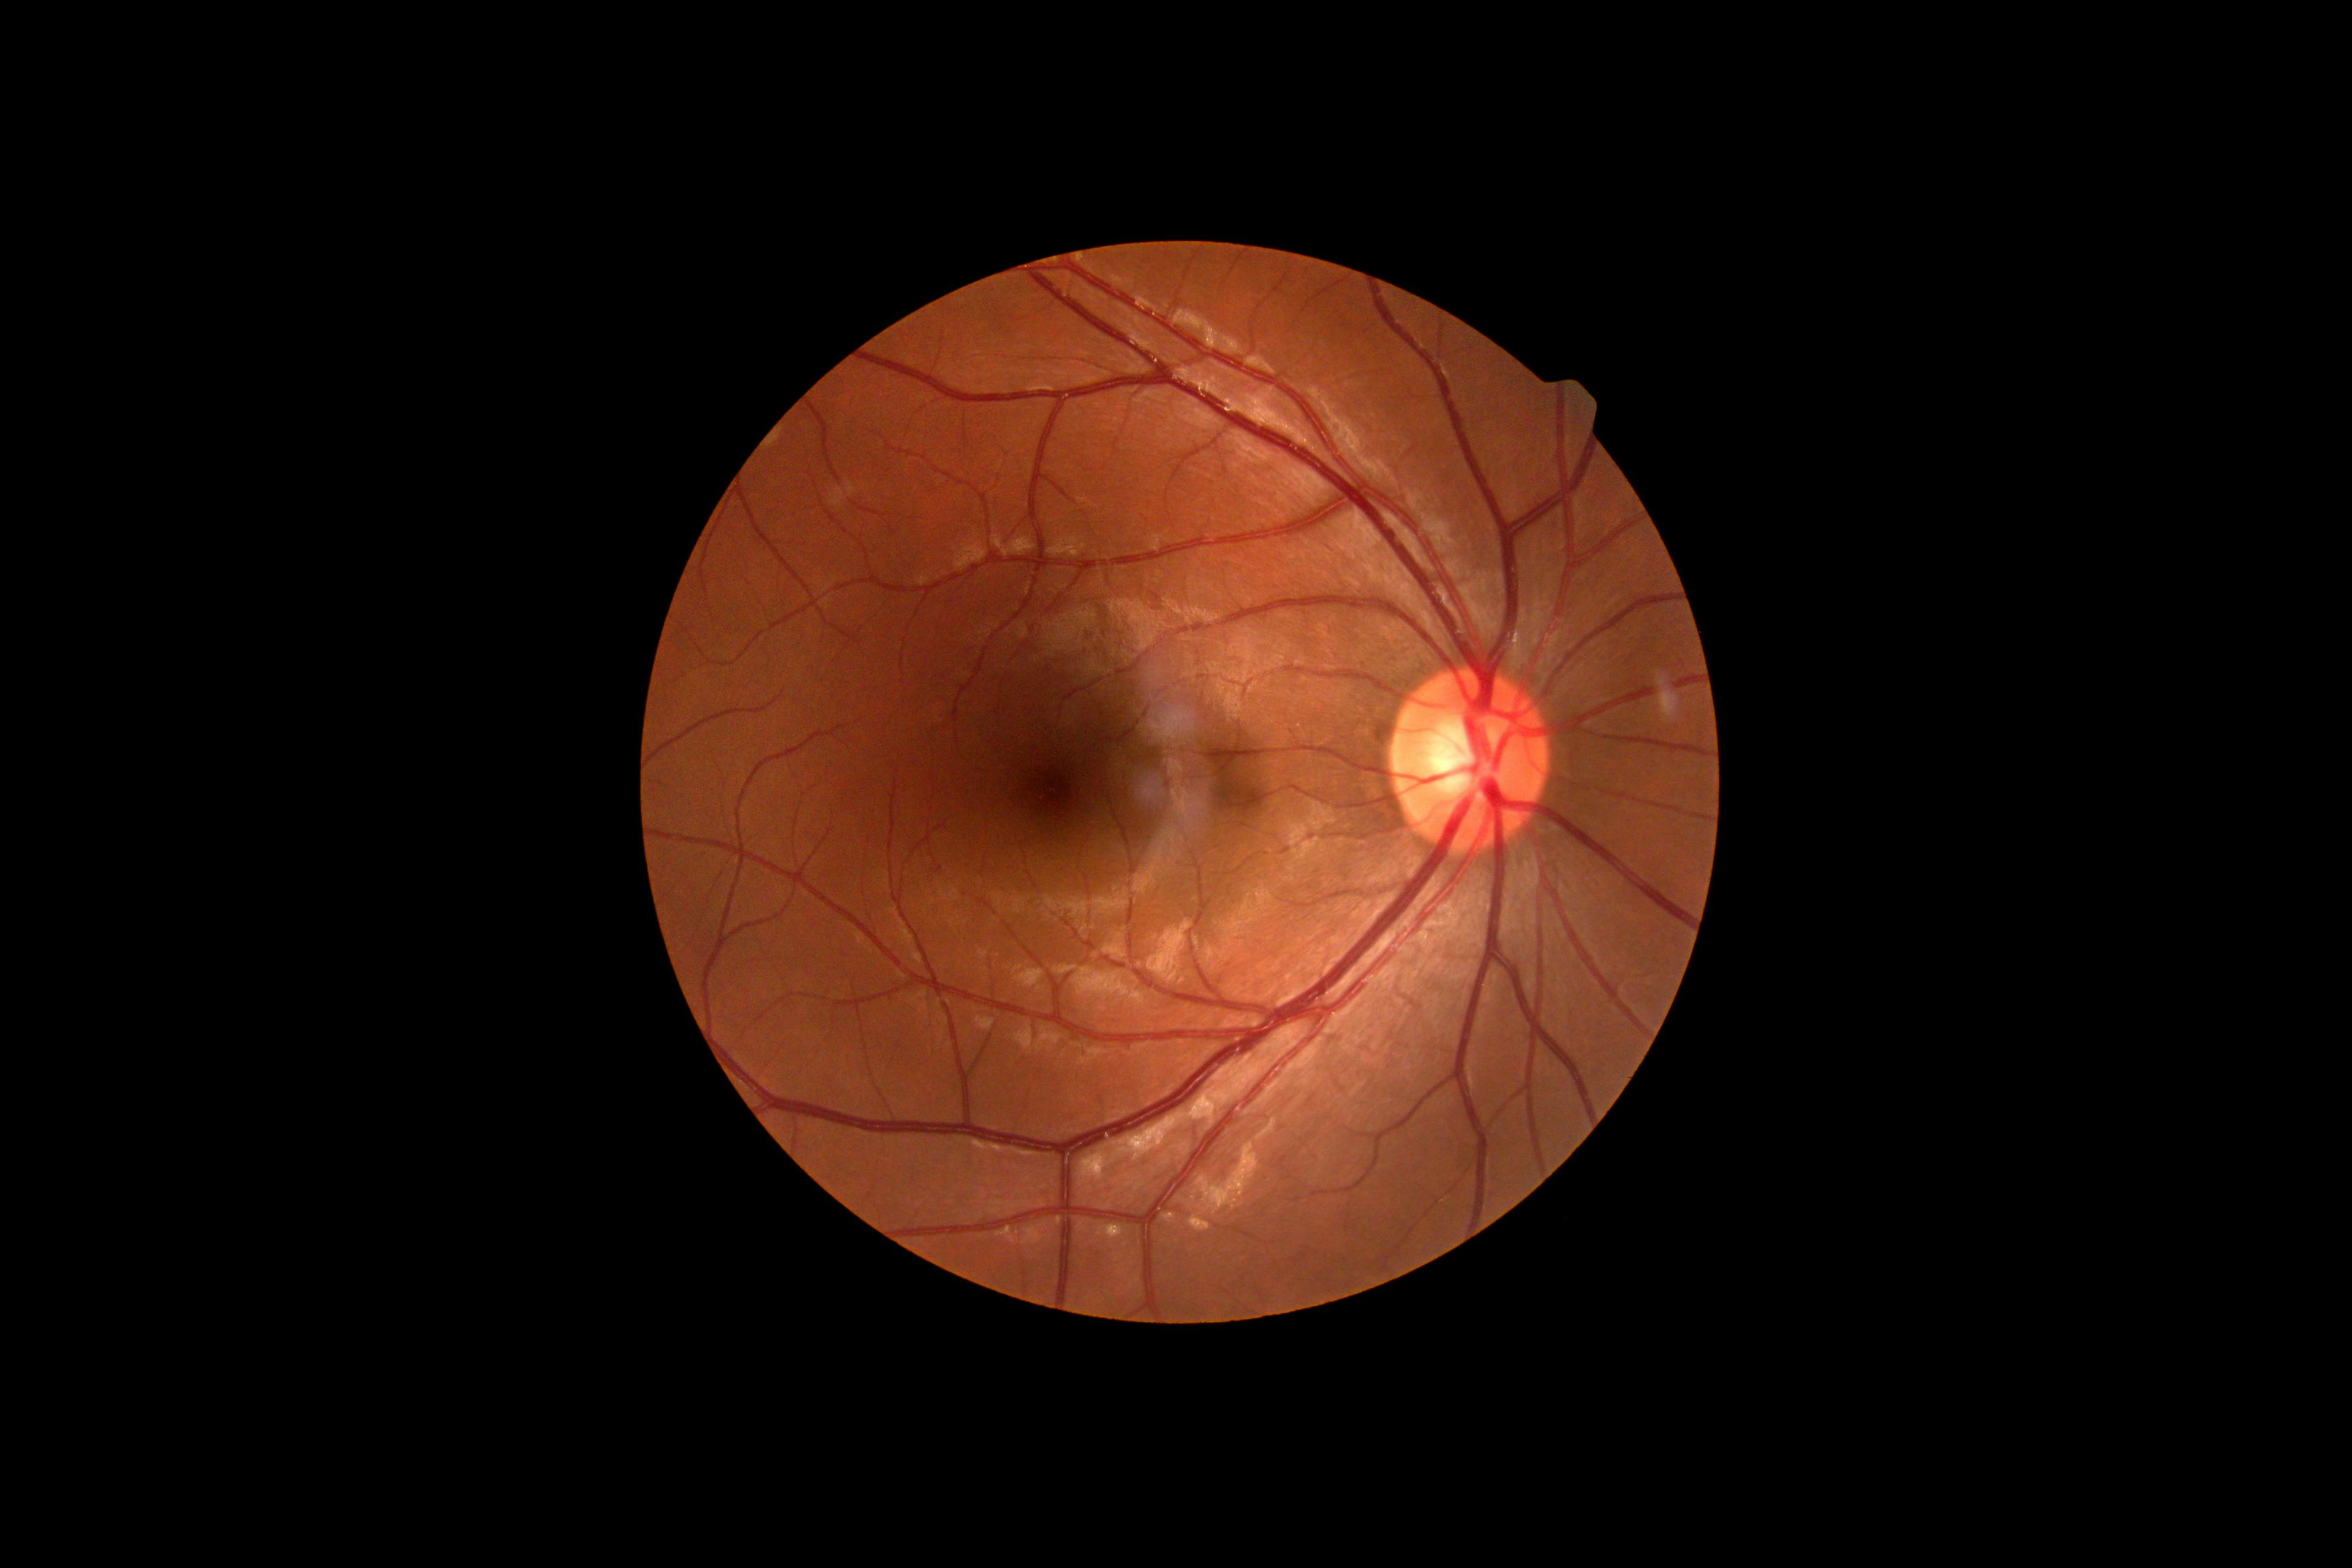 Risk of Retinal Vascular Occlusion After COVID-19 Vaccination